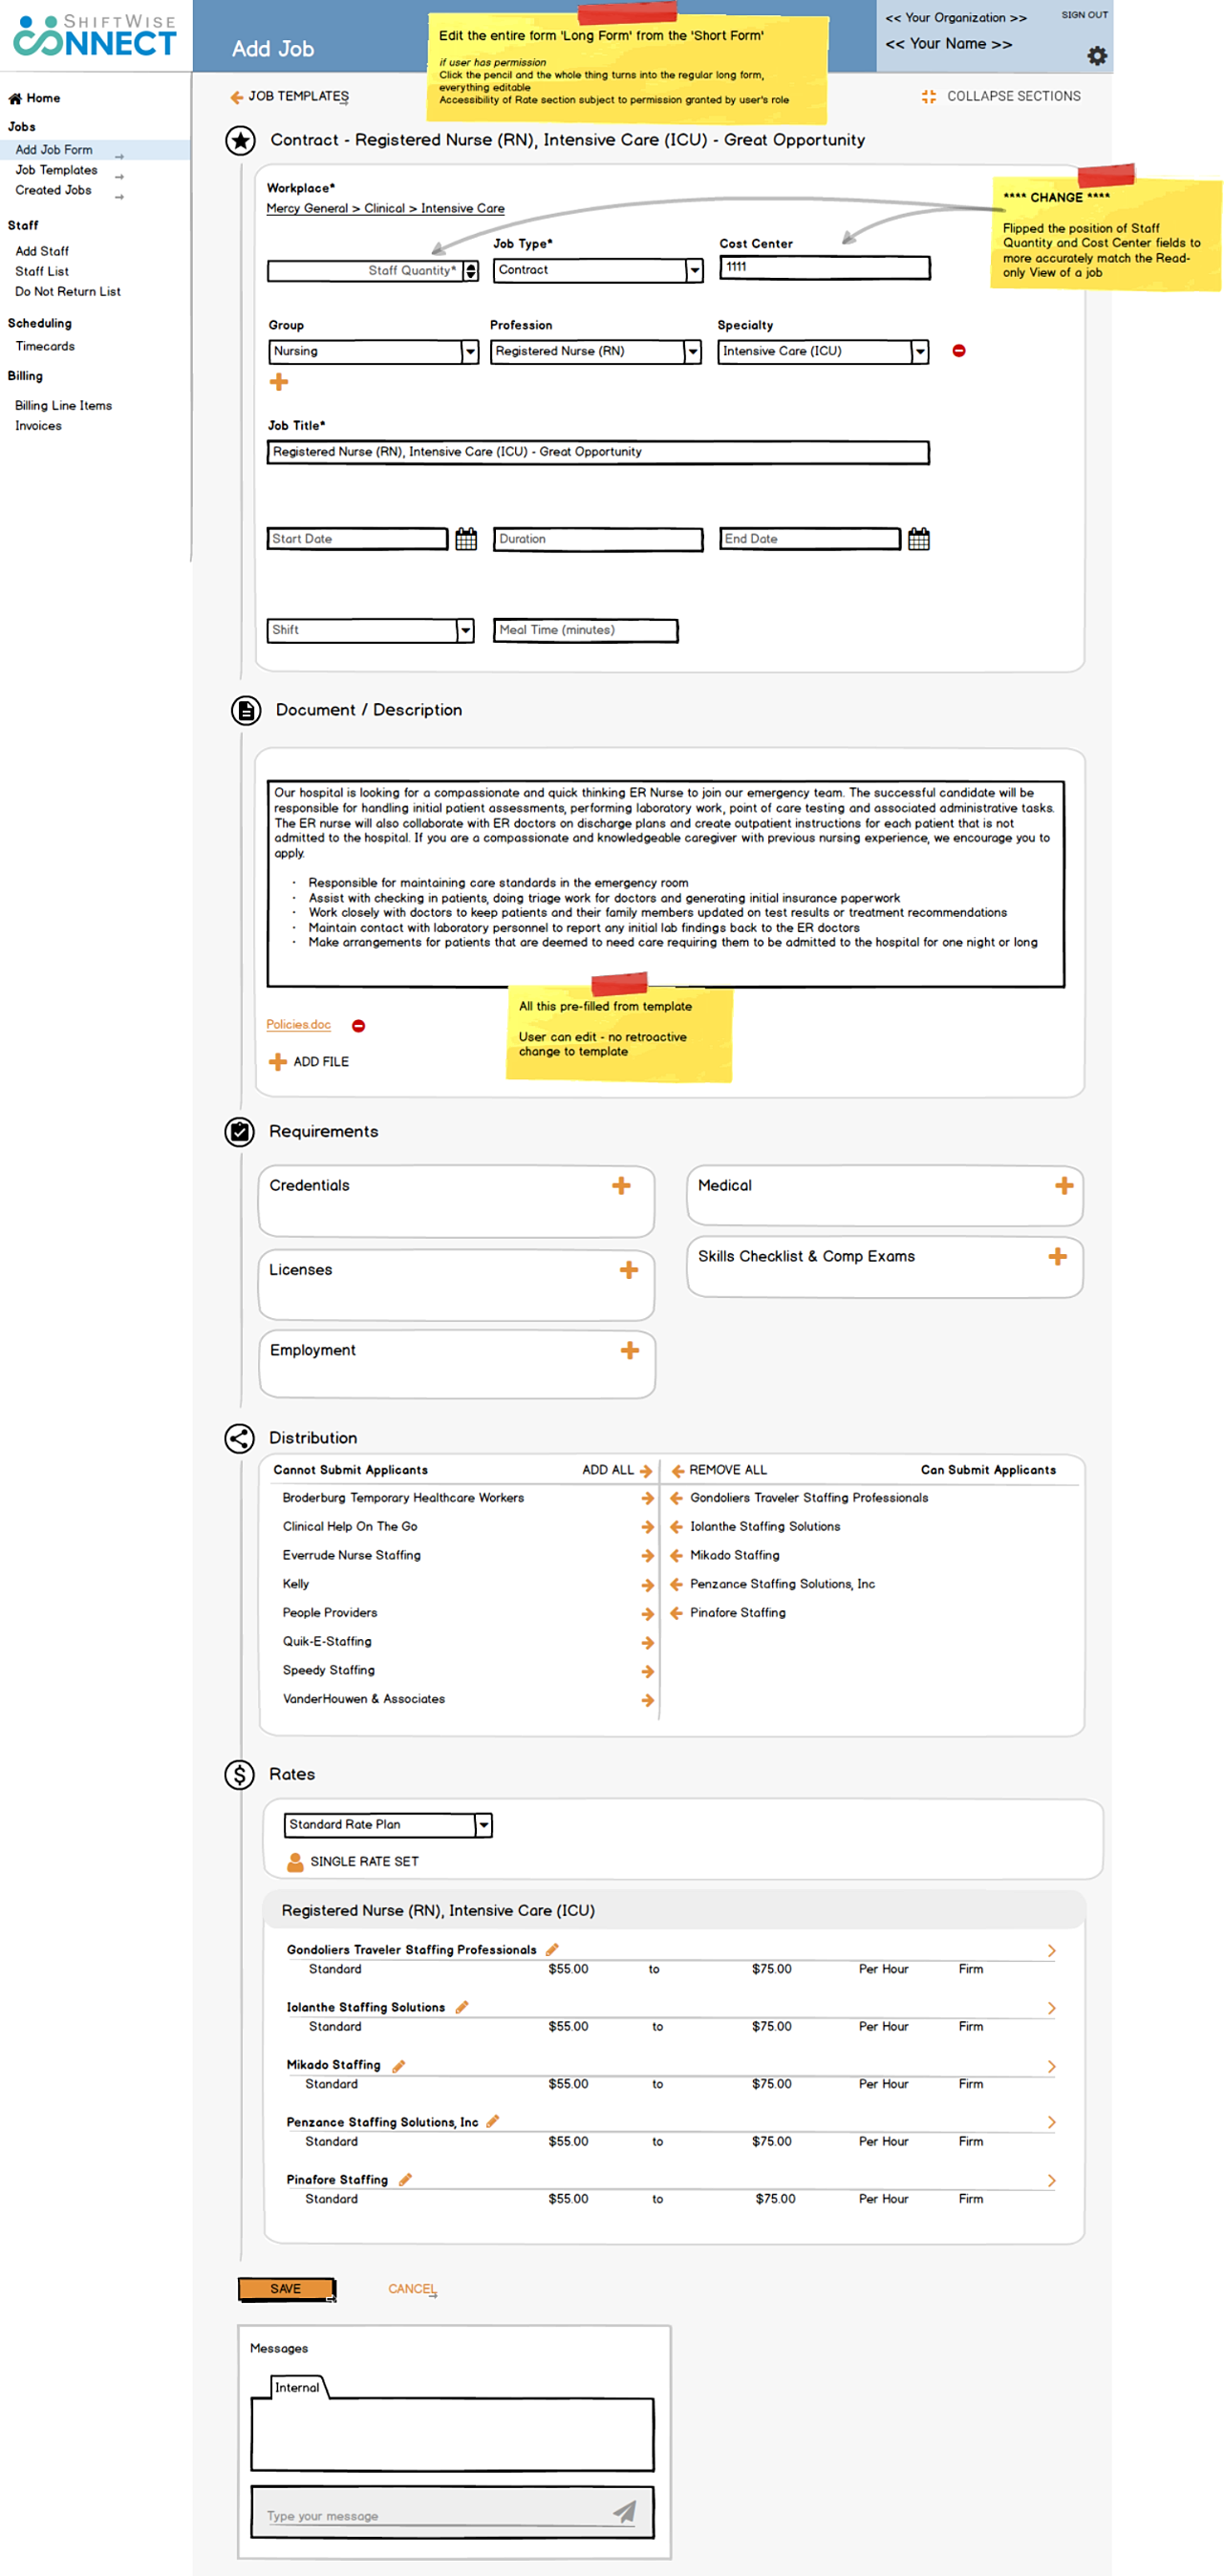 wireframe showing entire editable form